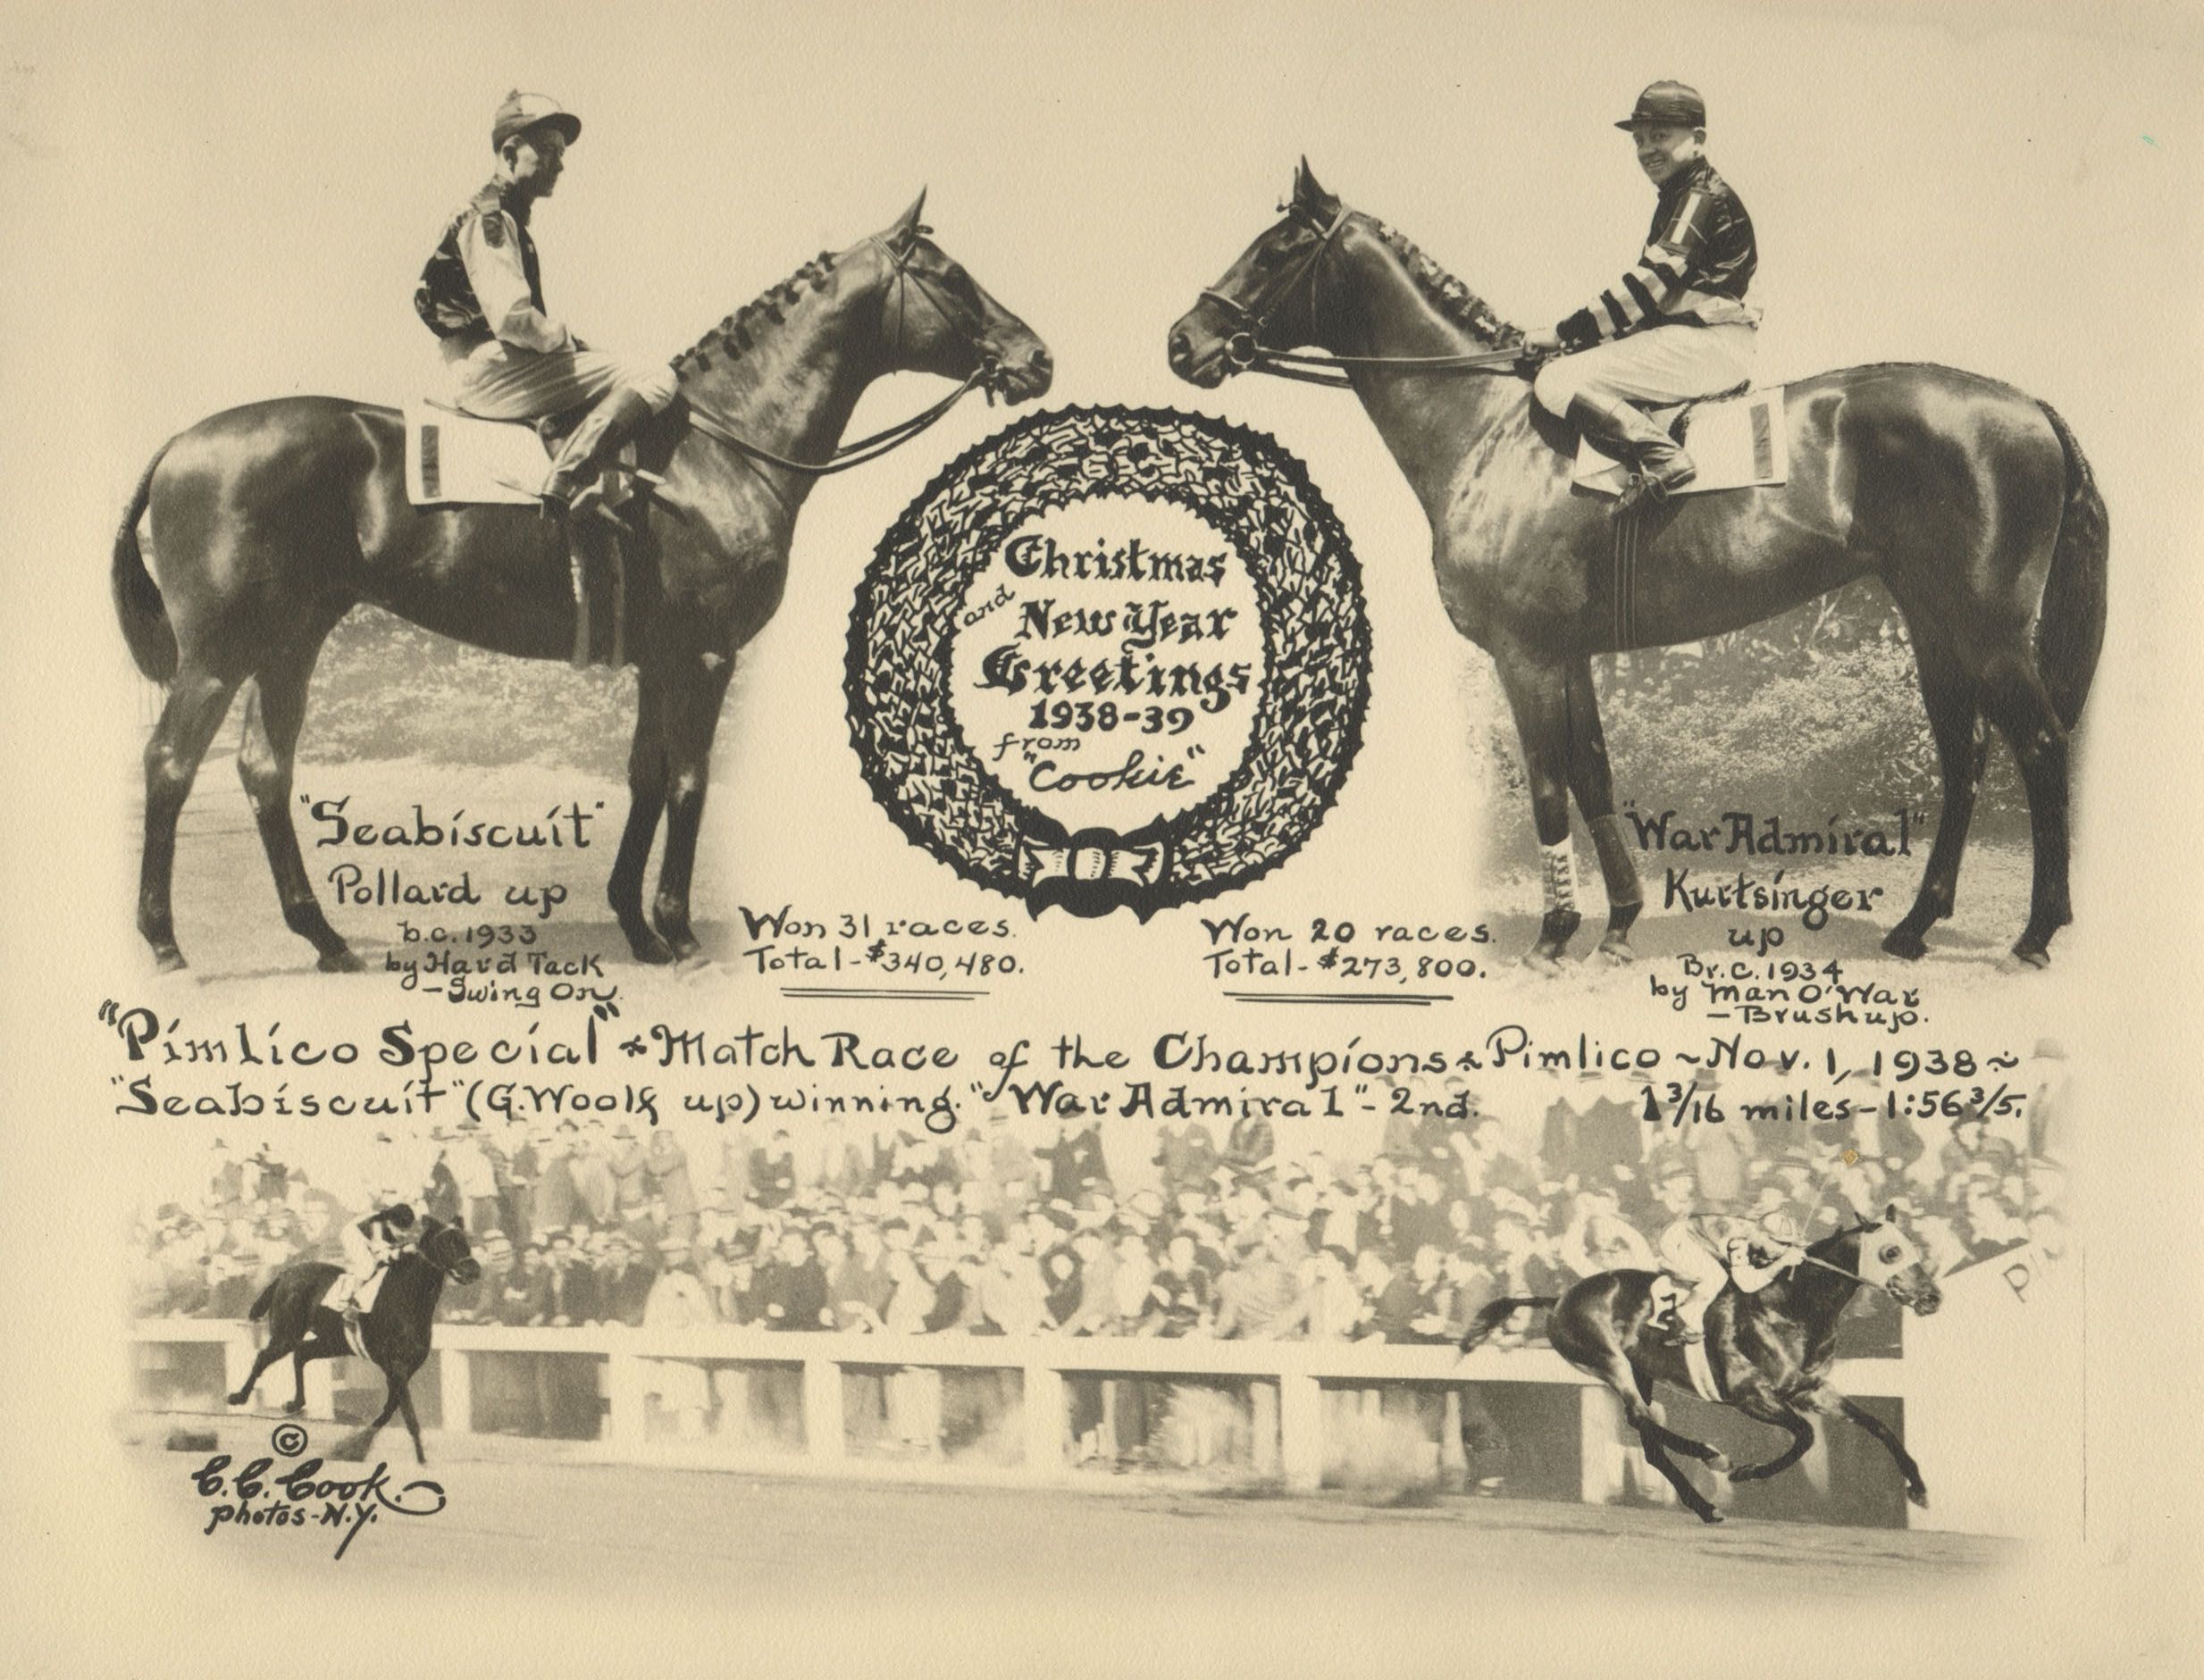 Seabiscuit vs. War Admiral, 1938 Pimlico Special, from a C. C. Cook Christmas card (C. C. Cook)